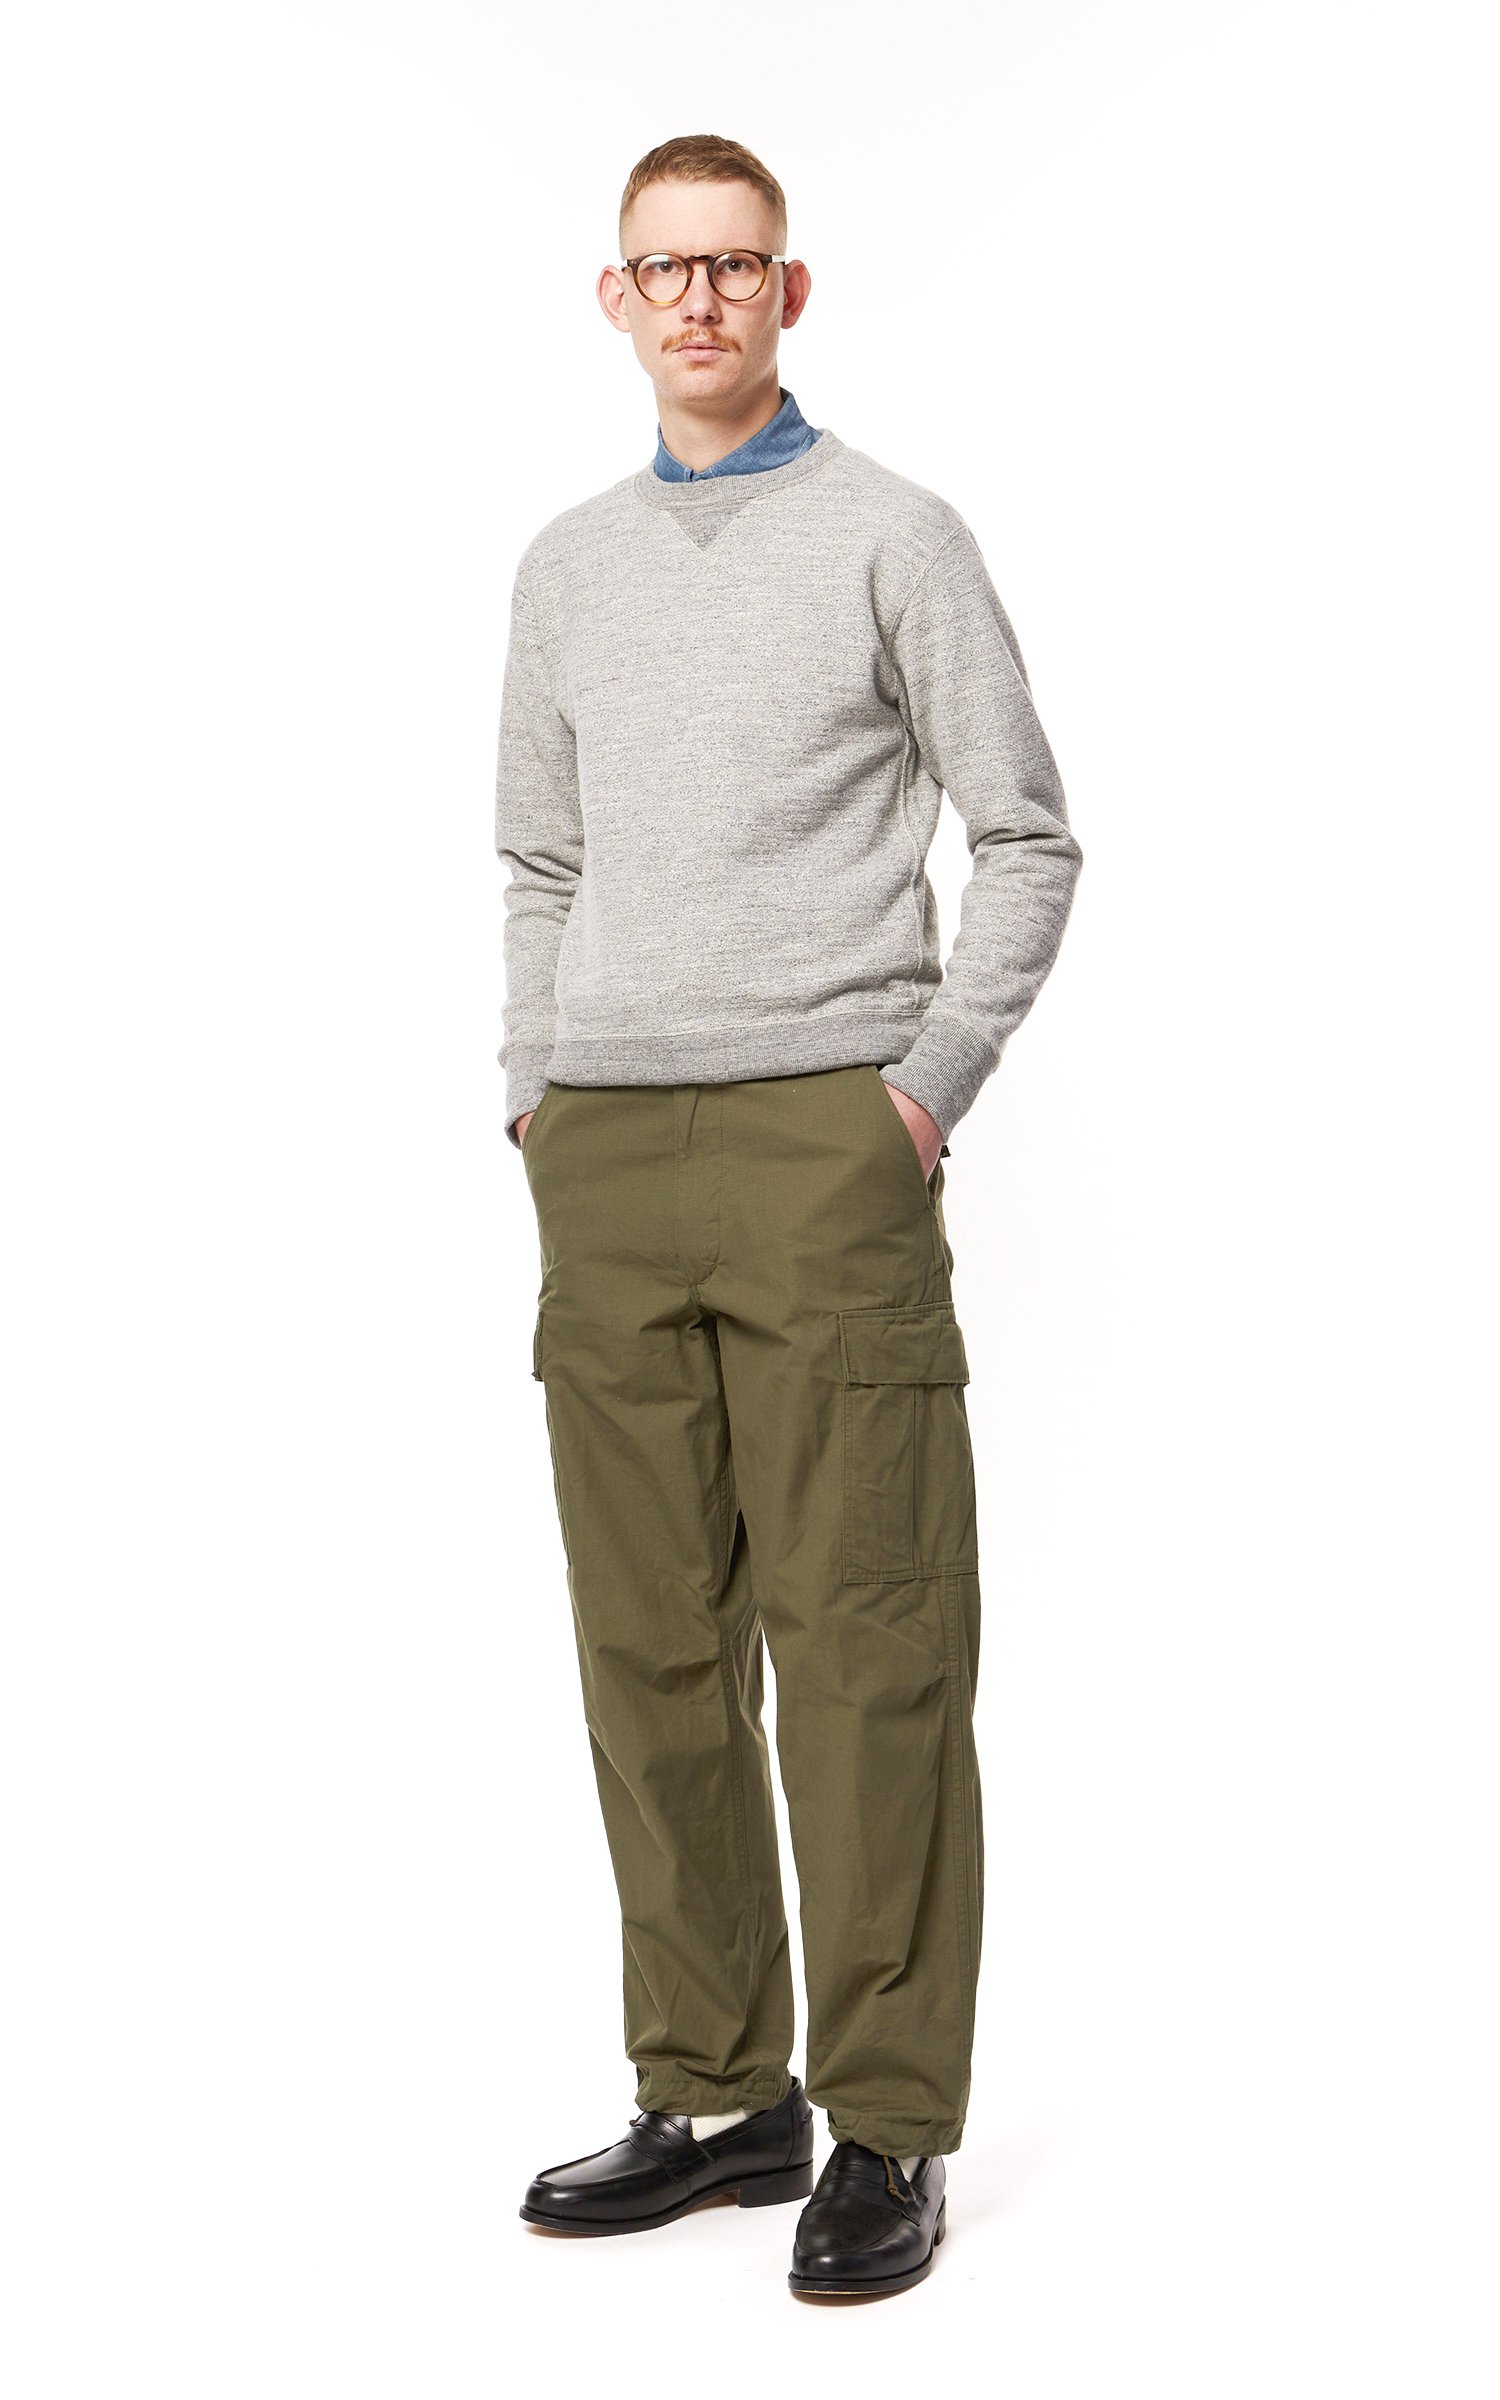 OrSlow Vintage Fit Cargo Pants Ripstop Army | Cultizm